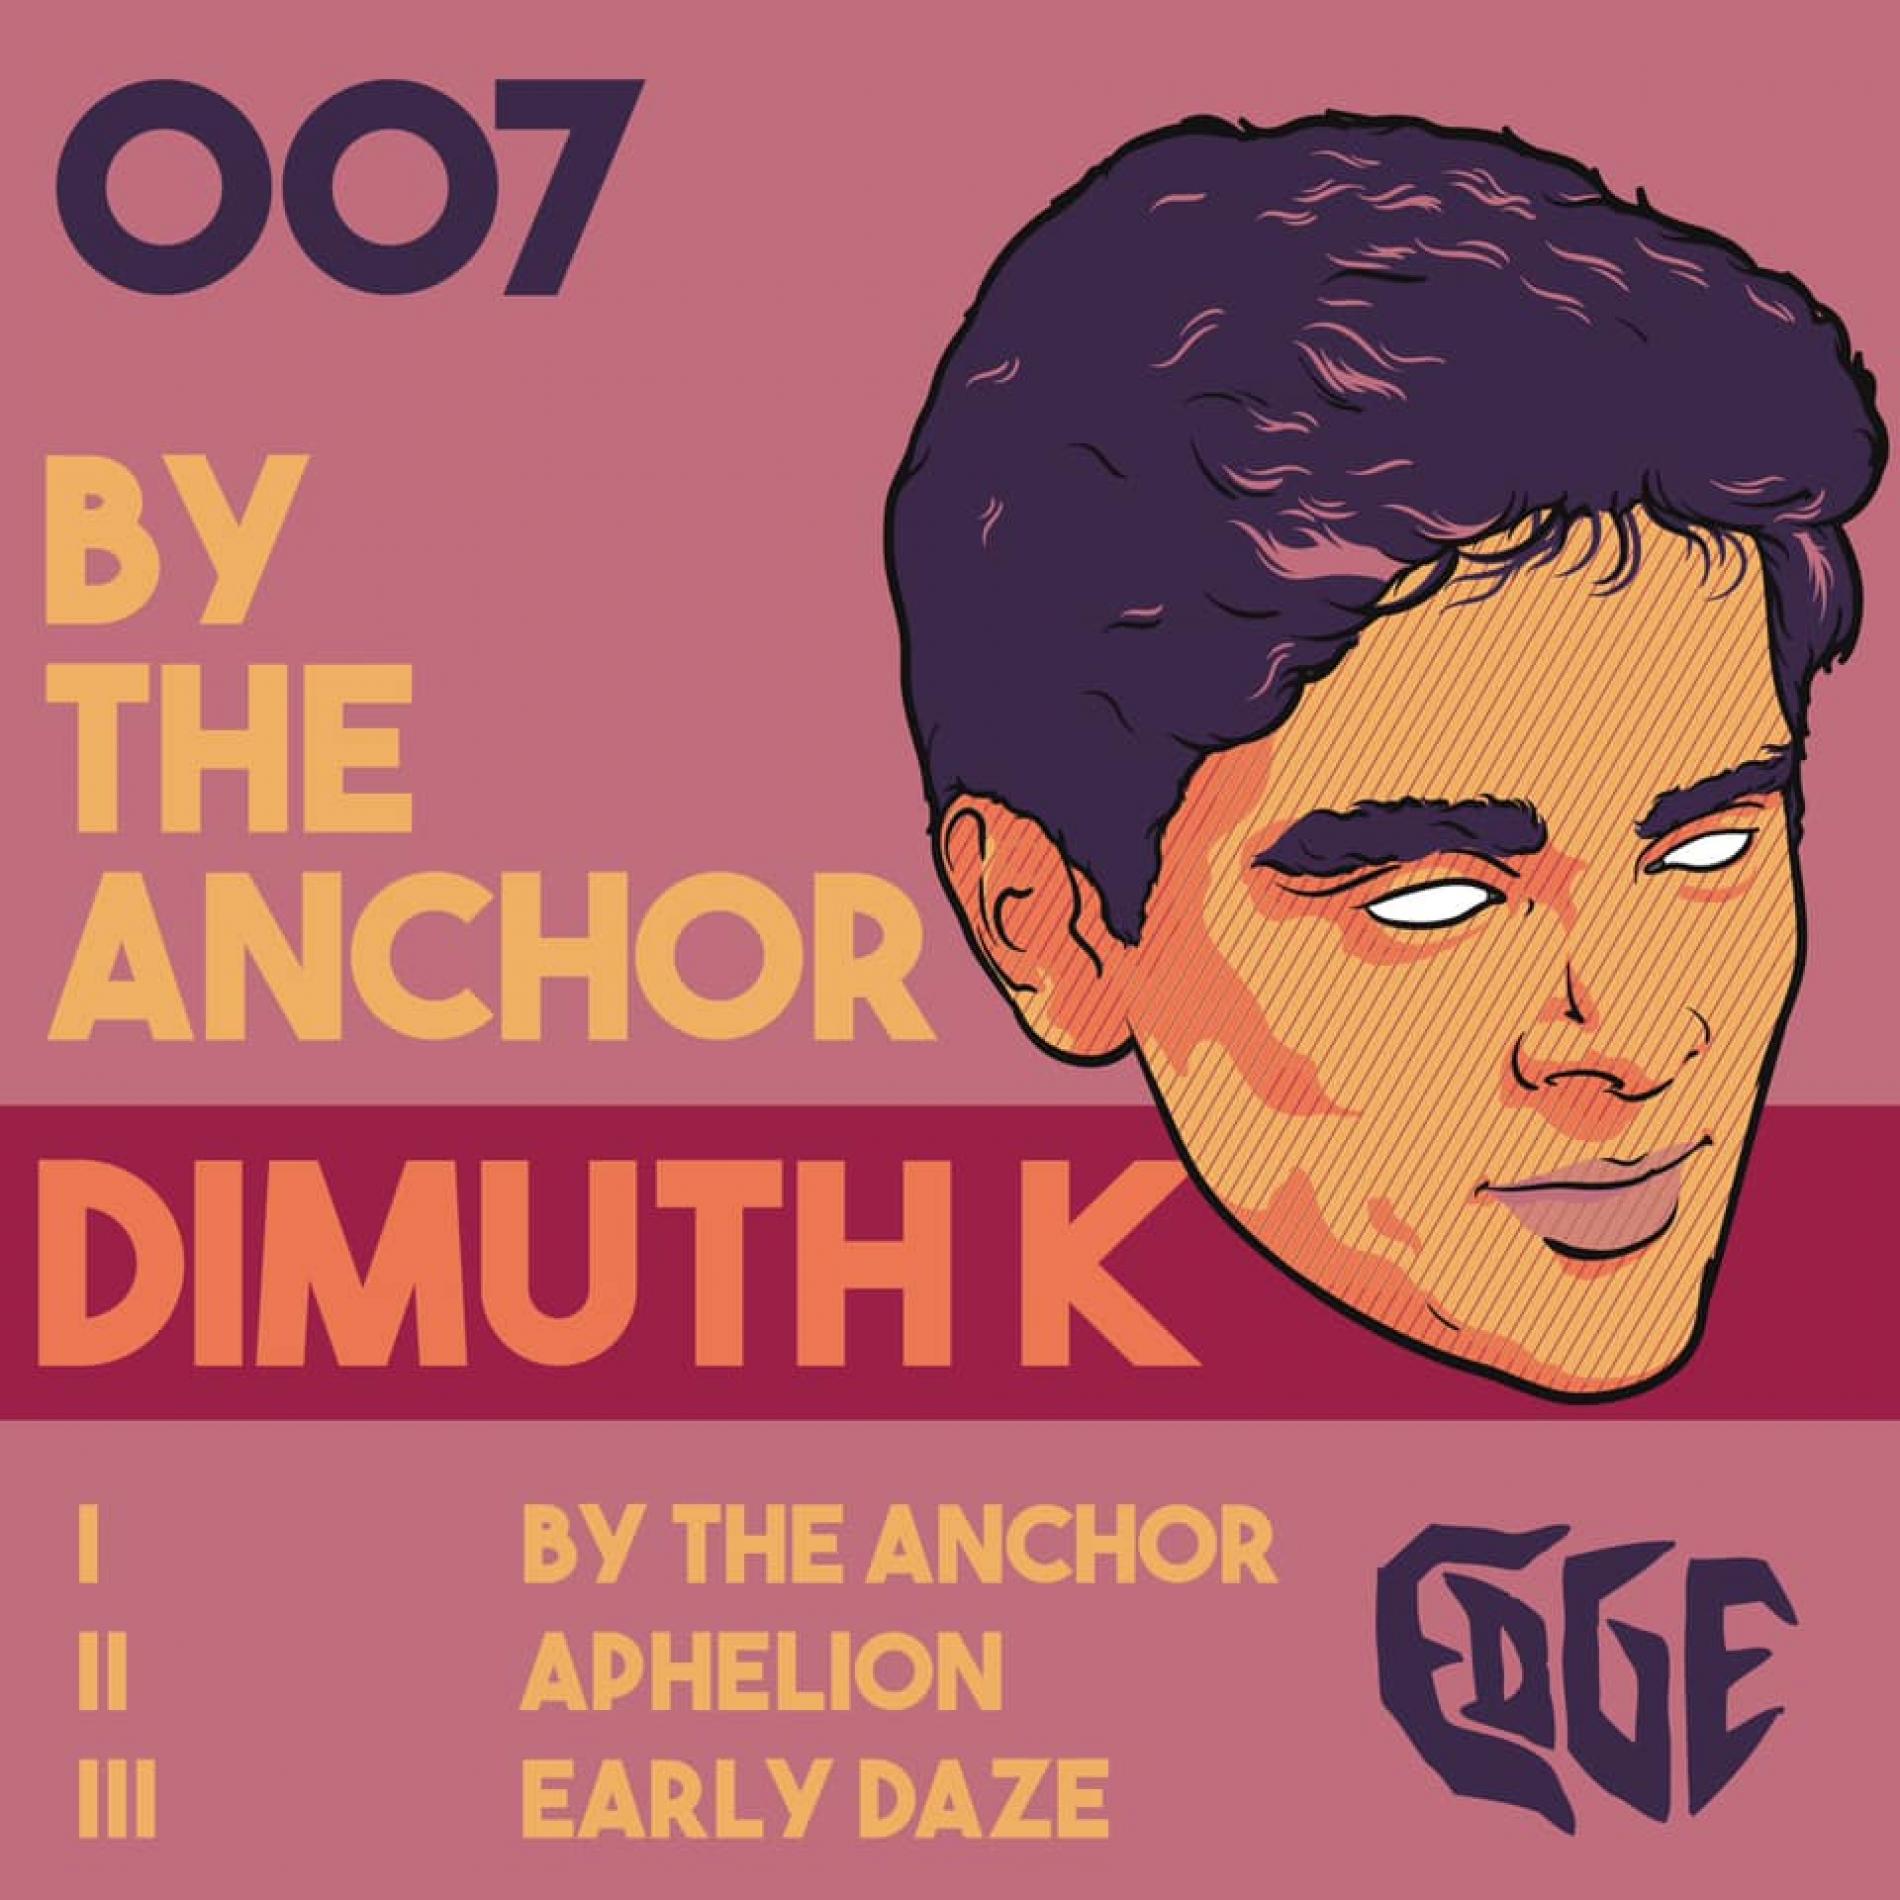 New Ep : By The Anchor By Dimuth K